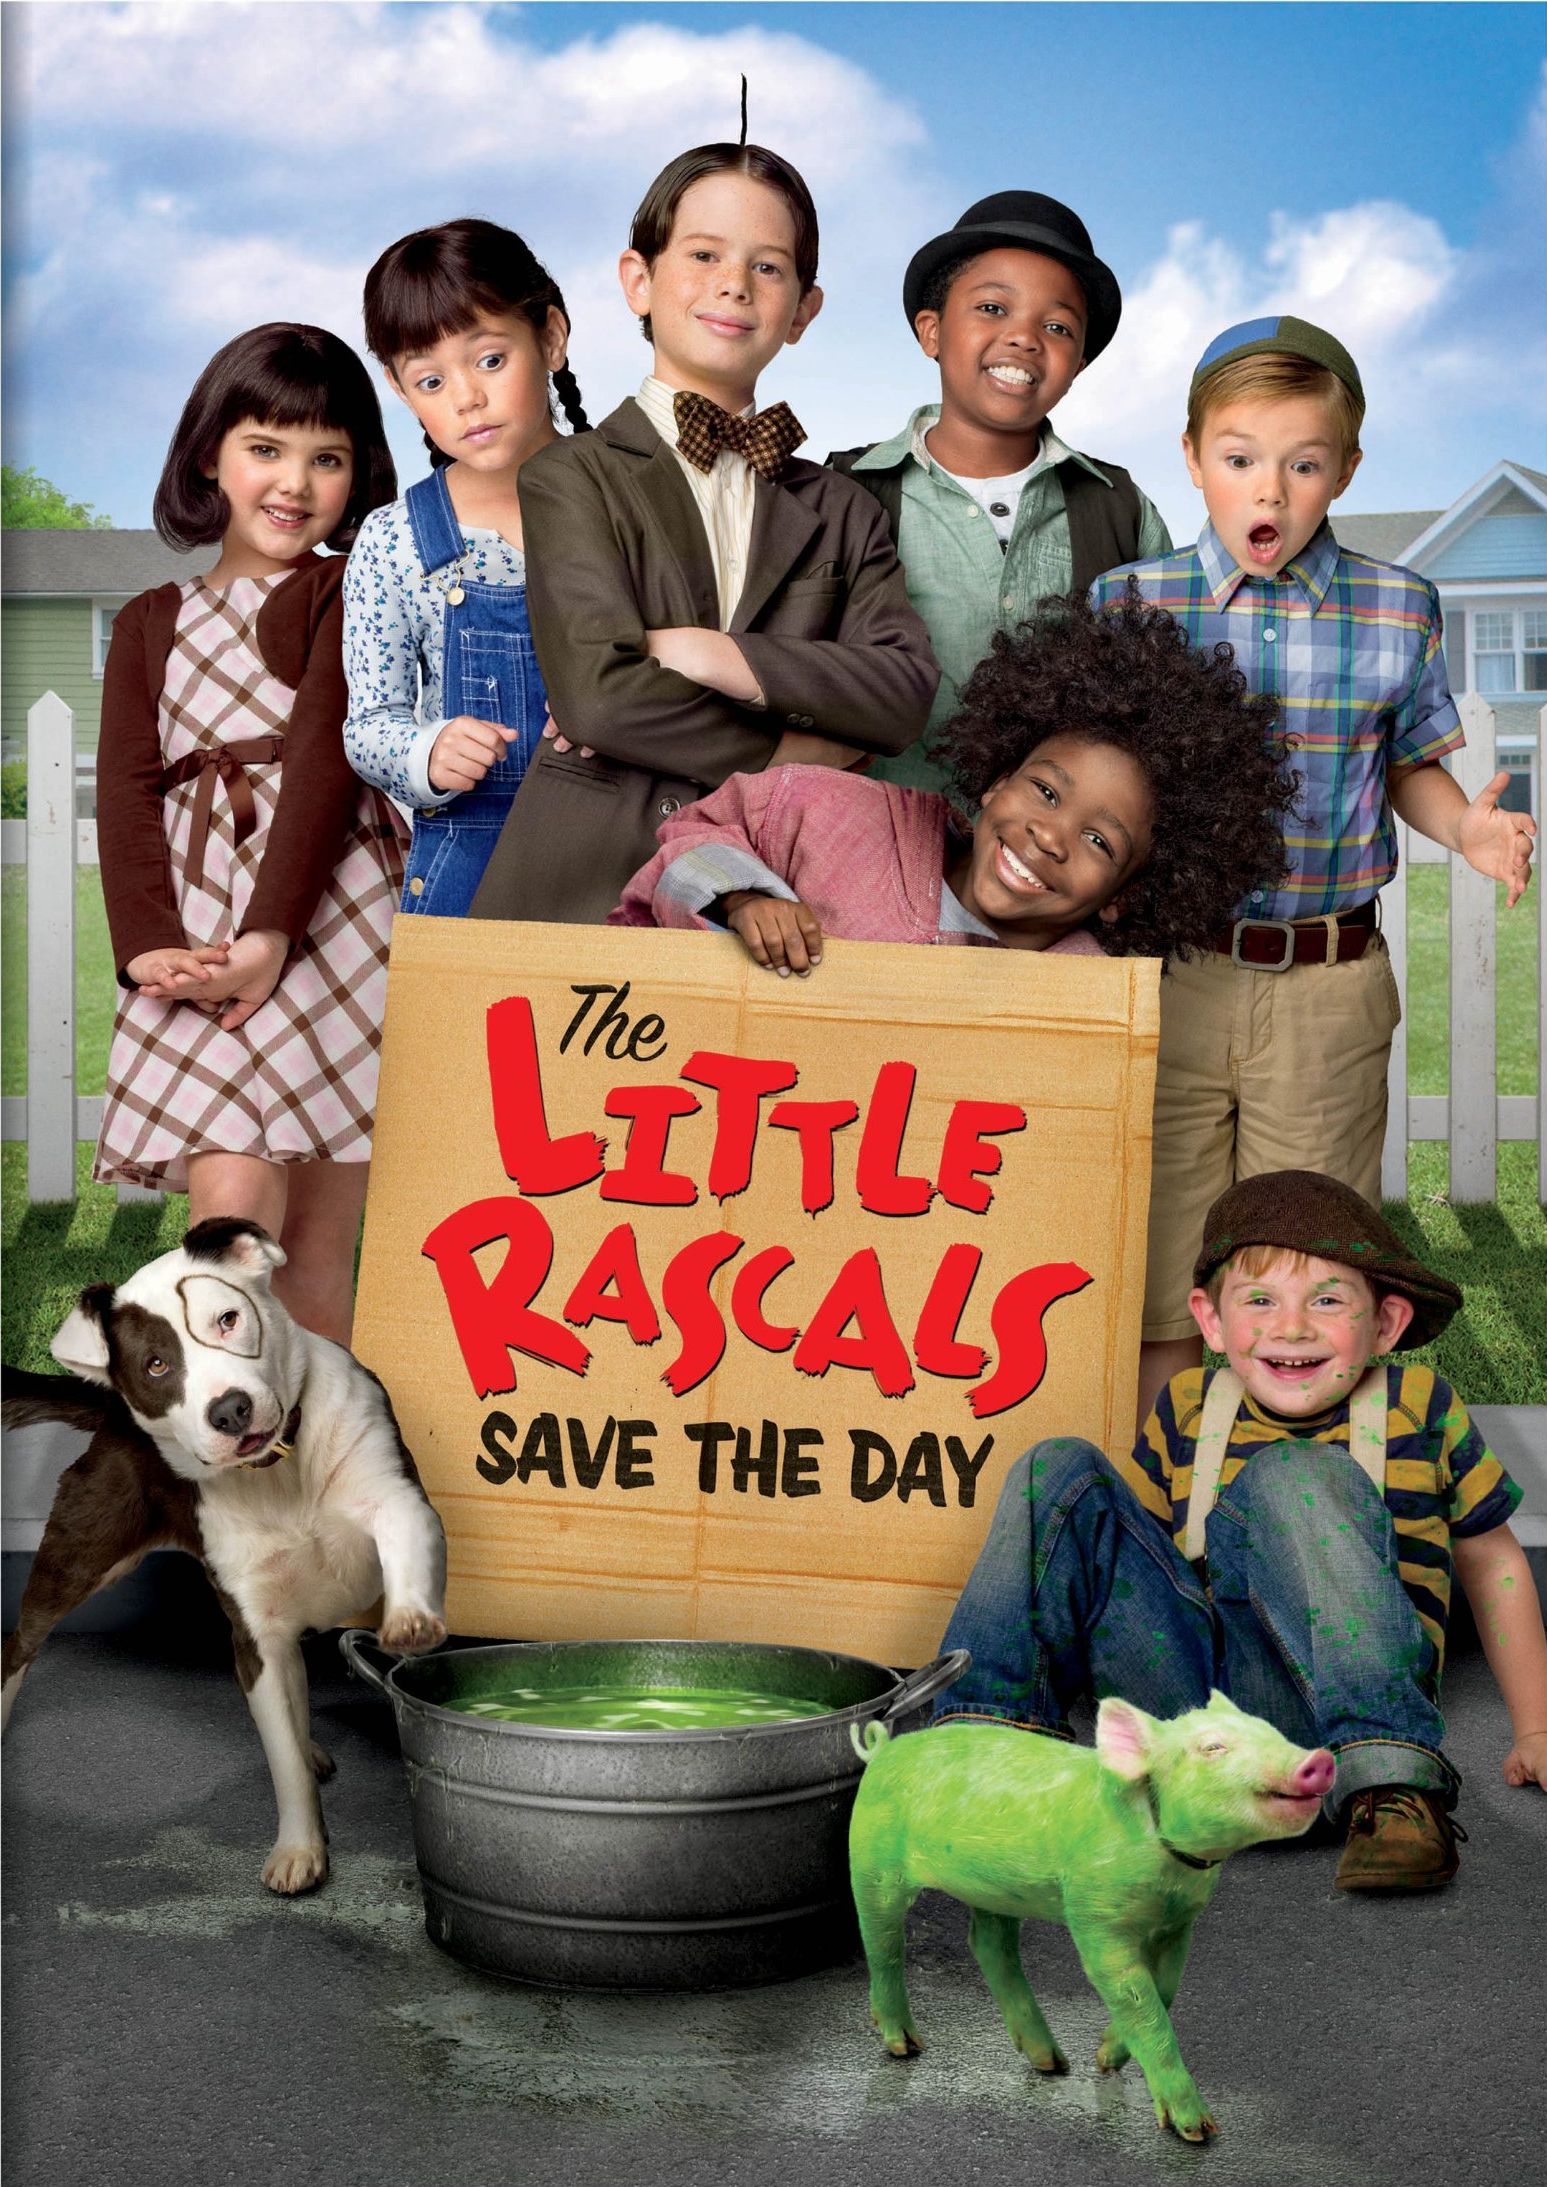 The Little Rascals Save the Day DVD Release Date April 1, 2014